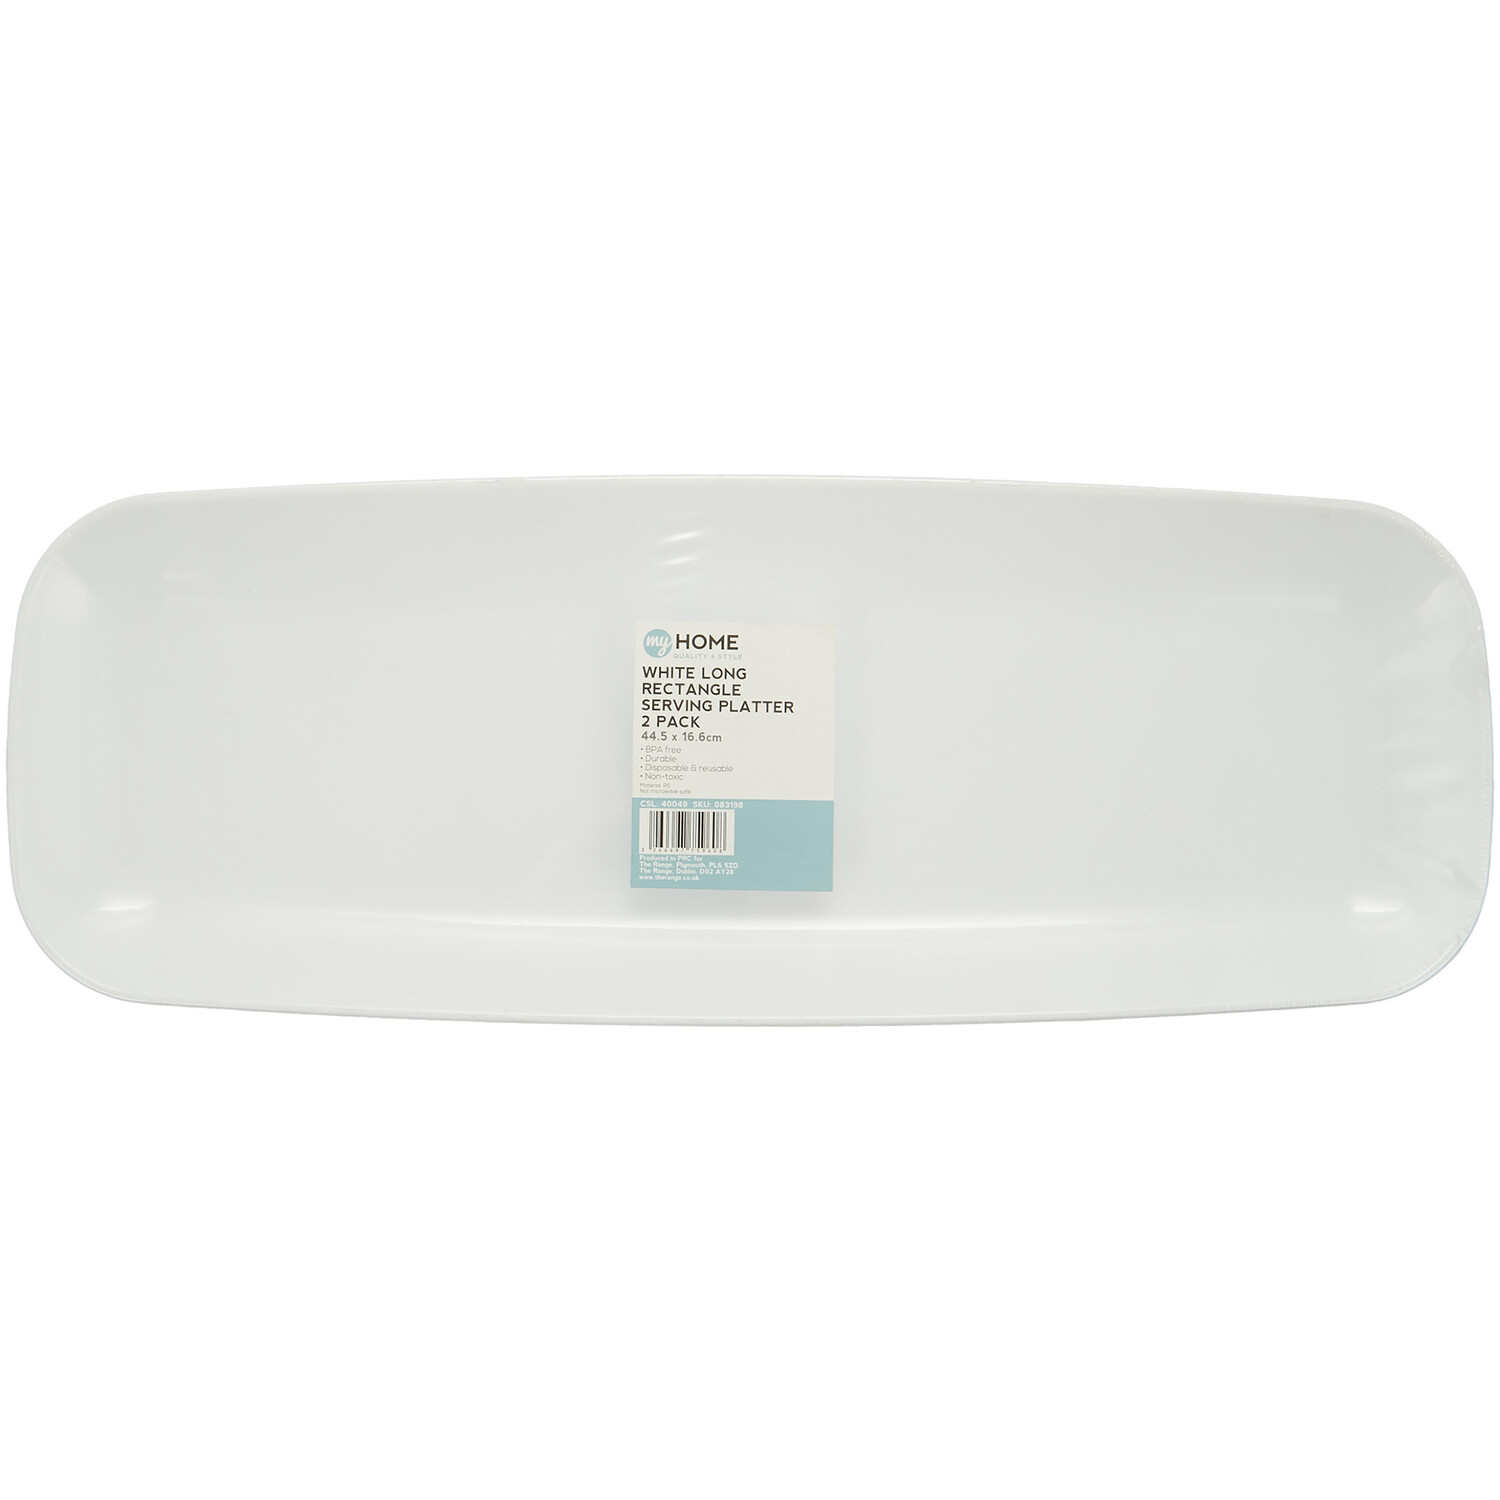 Pack of 2 Long Rectangle Serving Platters - White Image 1